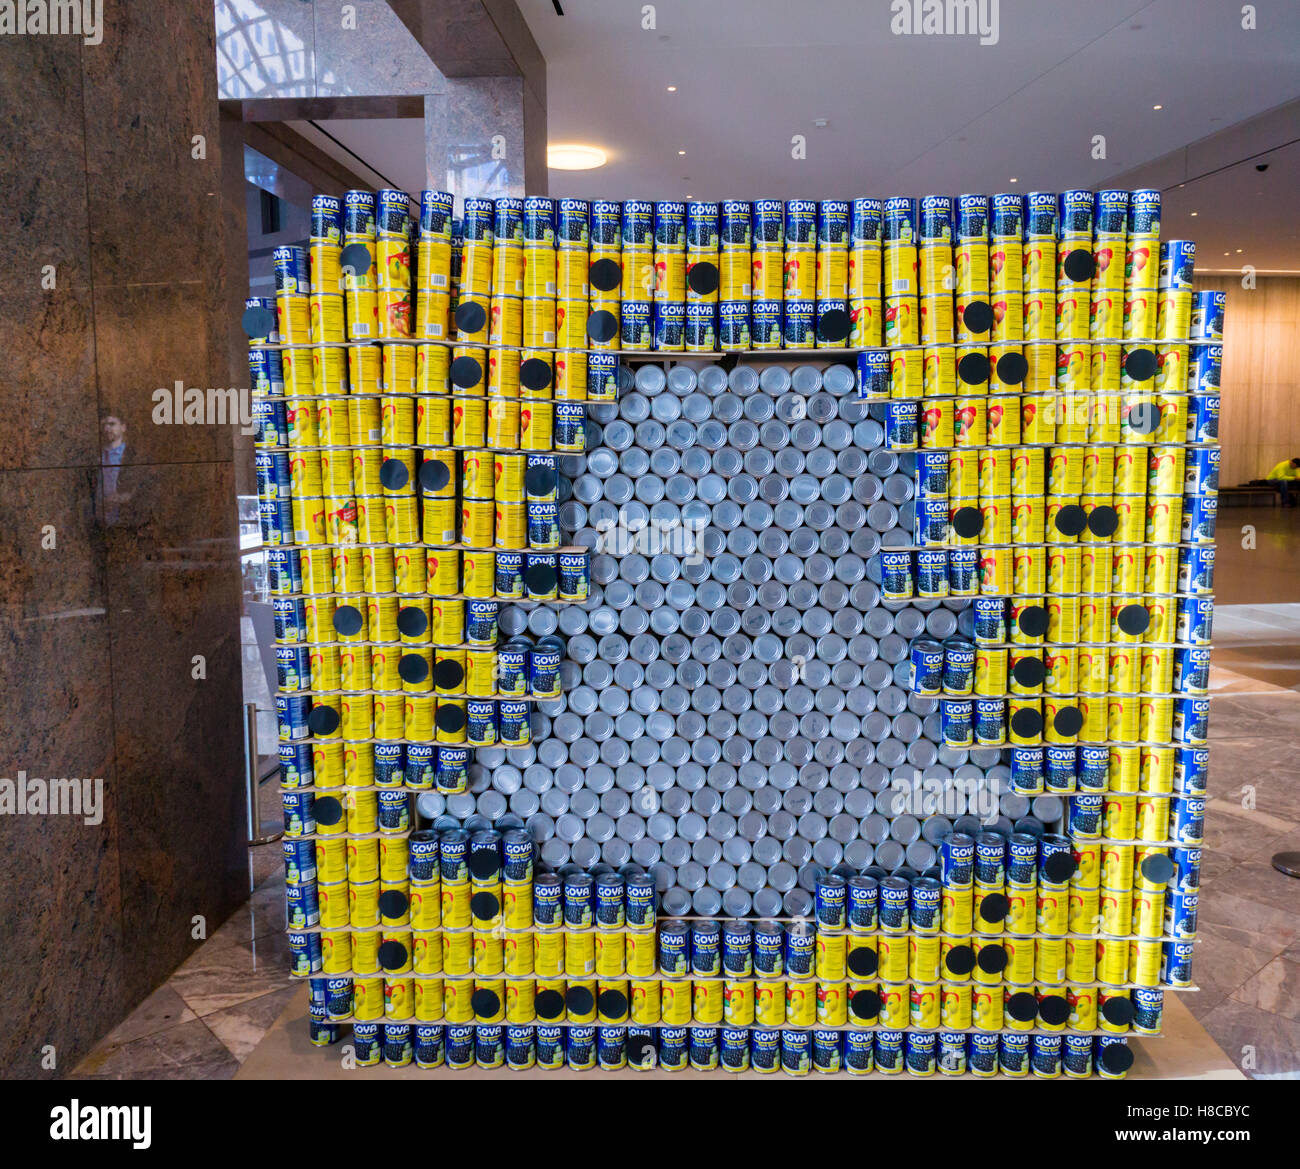 Sanp! and Hunger is Gone by Ganmett Fleming in the 24th annual Canstruction Design Competition in New York, seen on Friday, November 4, 2016, on display in Brookfield Place. The sculpture is made of 2360 cans and will feed 1844 New Yorkers. Architecture and design firm participate to design and build giant structures made from cans of food.  The cans are donated to City Harvest at the close of the exhibit. Over 100,000 cans of food were collected and will be used to feed the needy at 500 soup kitchens and food pantries. (© Richard B. Levine) Stock Photo